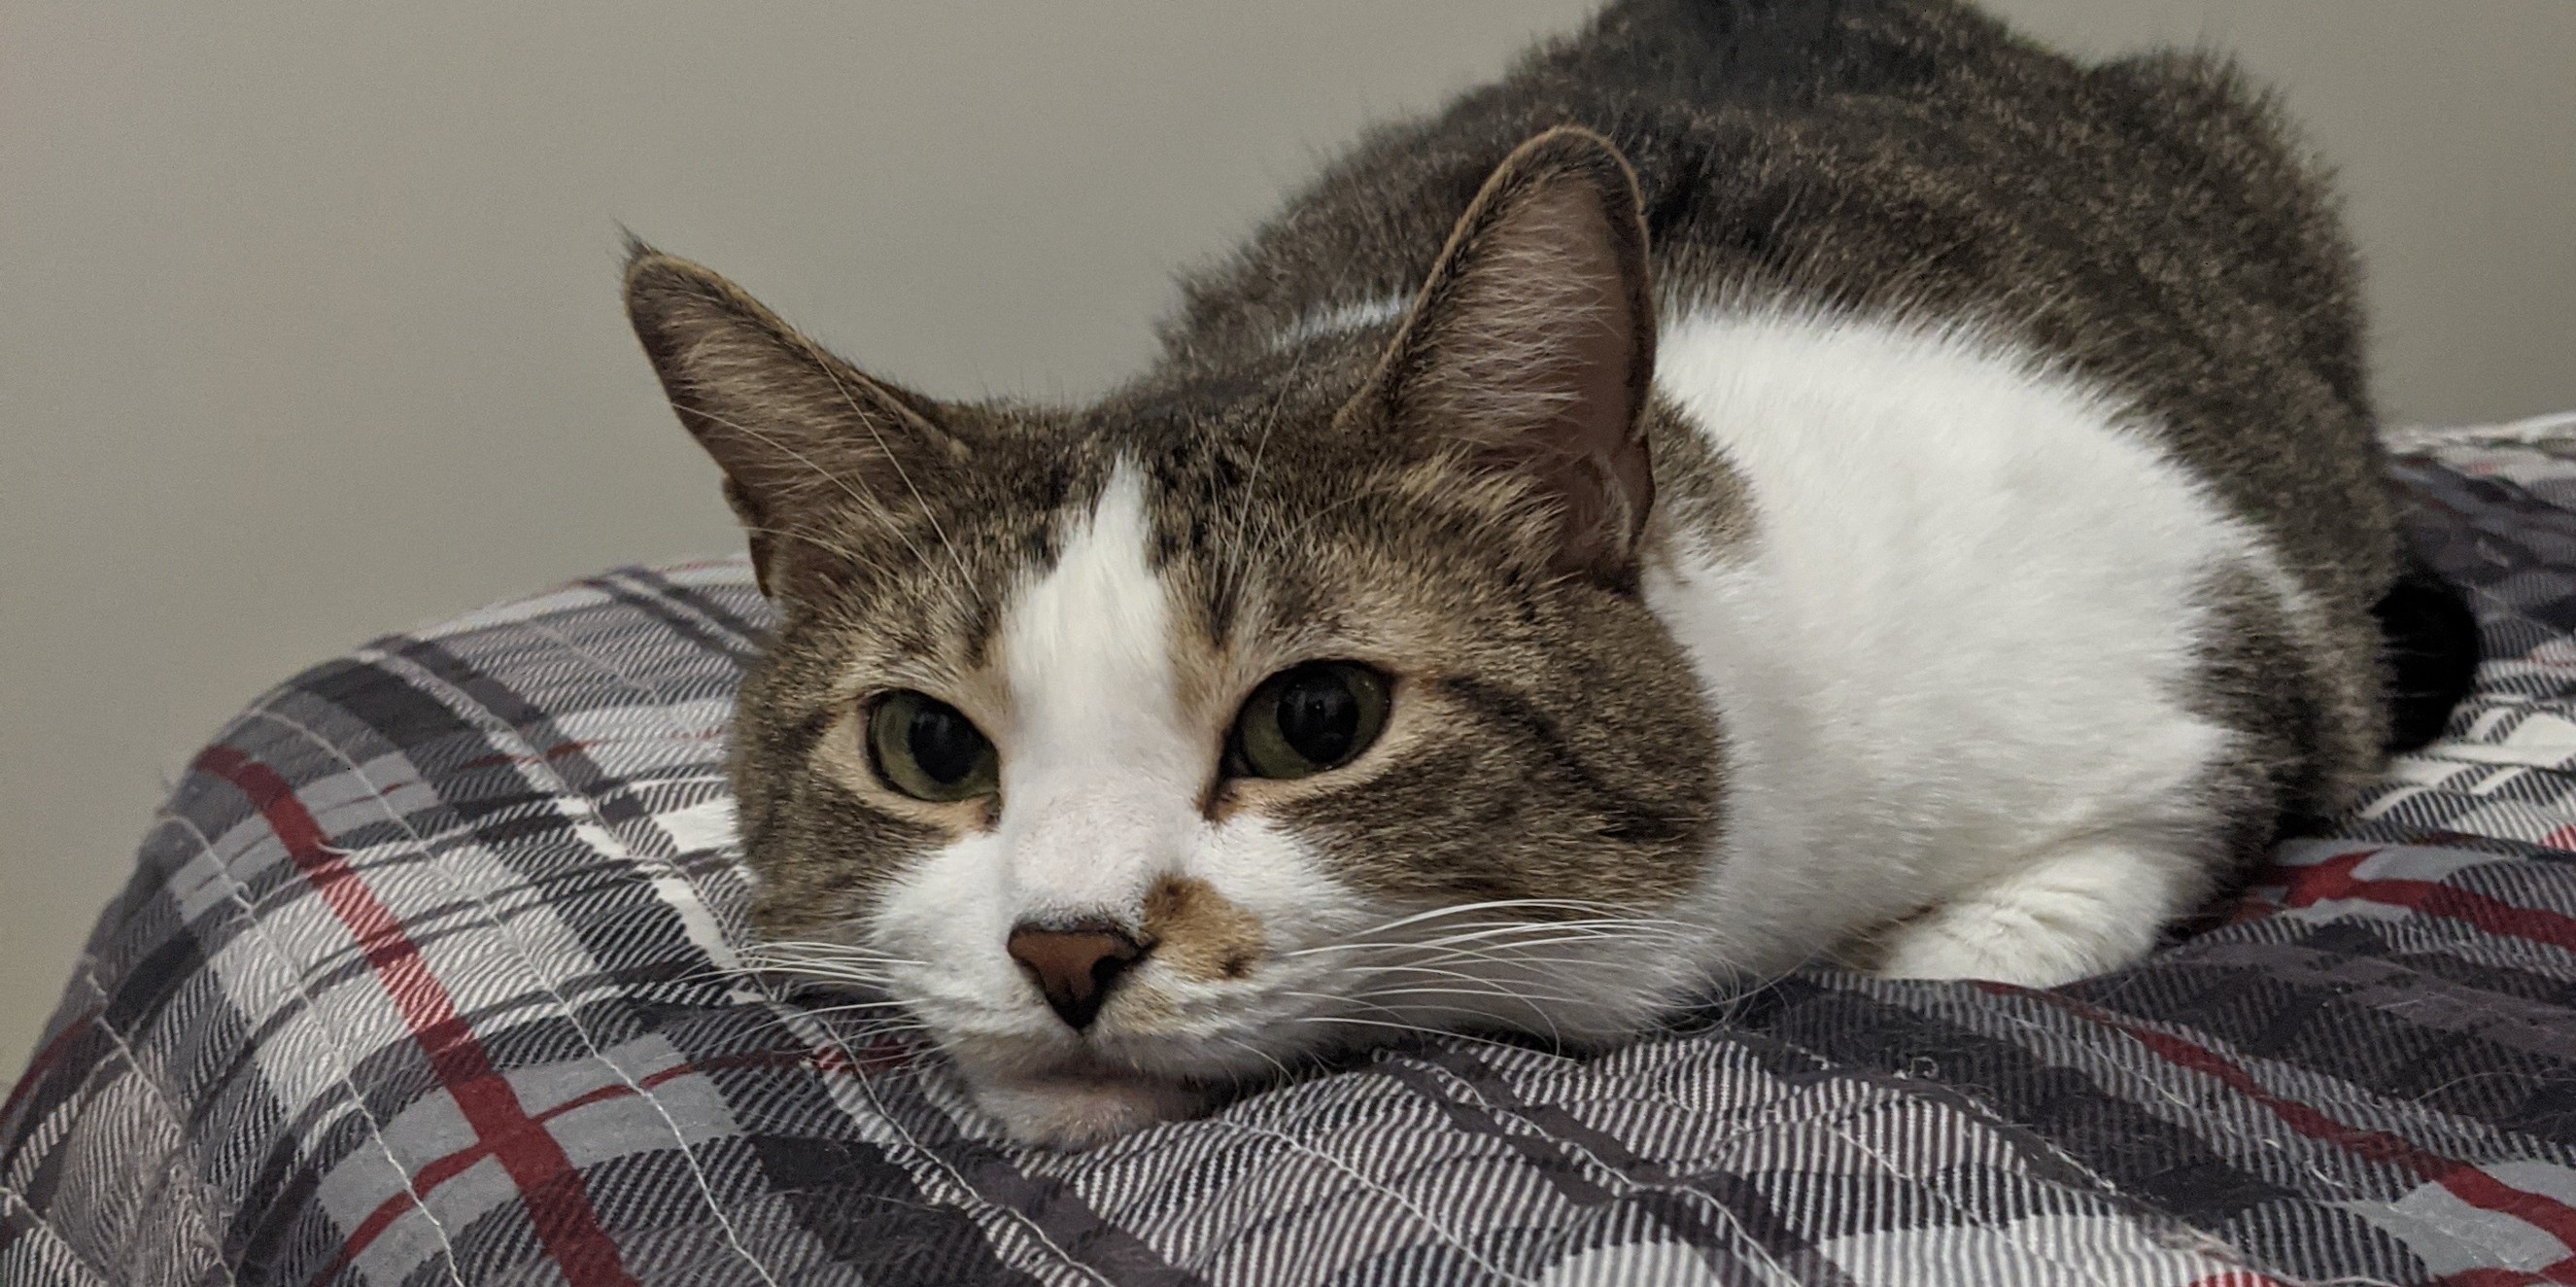 A photo of a tabby cat resting her head on her owner's bed, looking at the camera with an inquisitive gaze